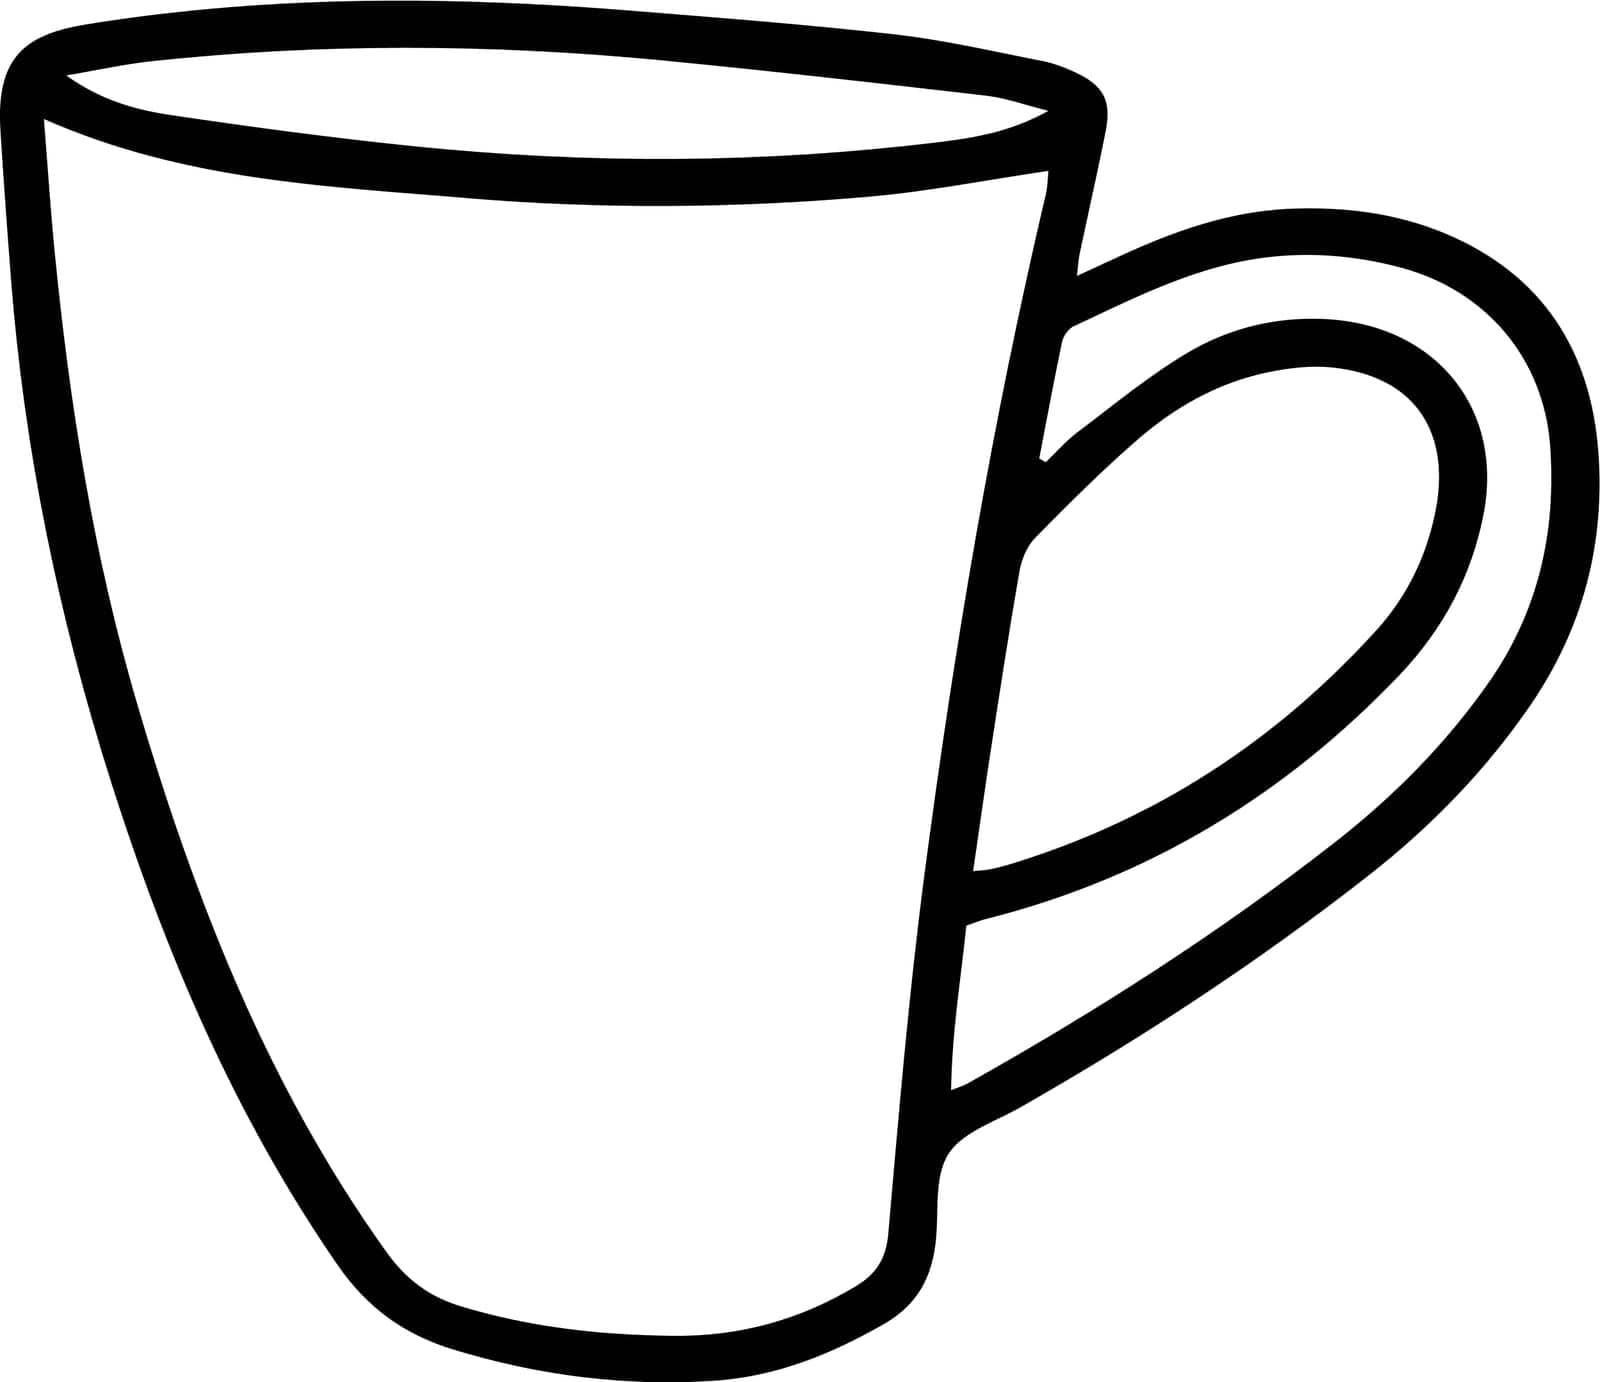 Mug isolated on a white background. Doodle by Dustick